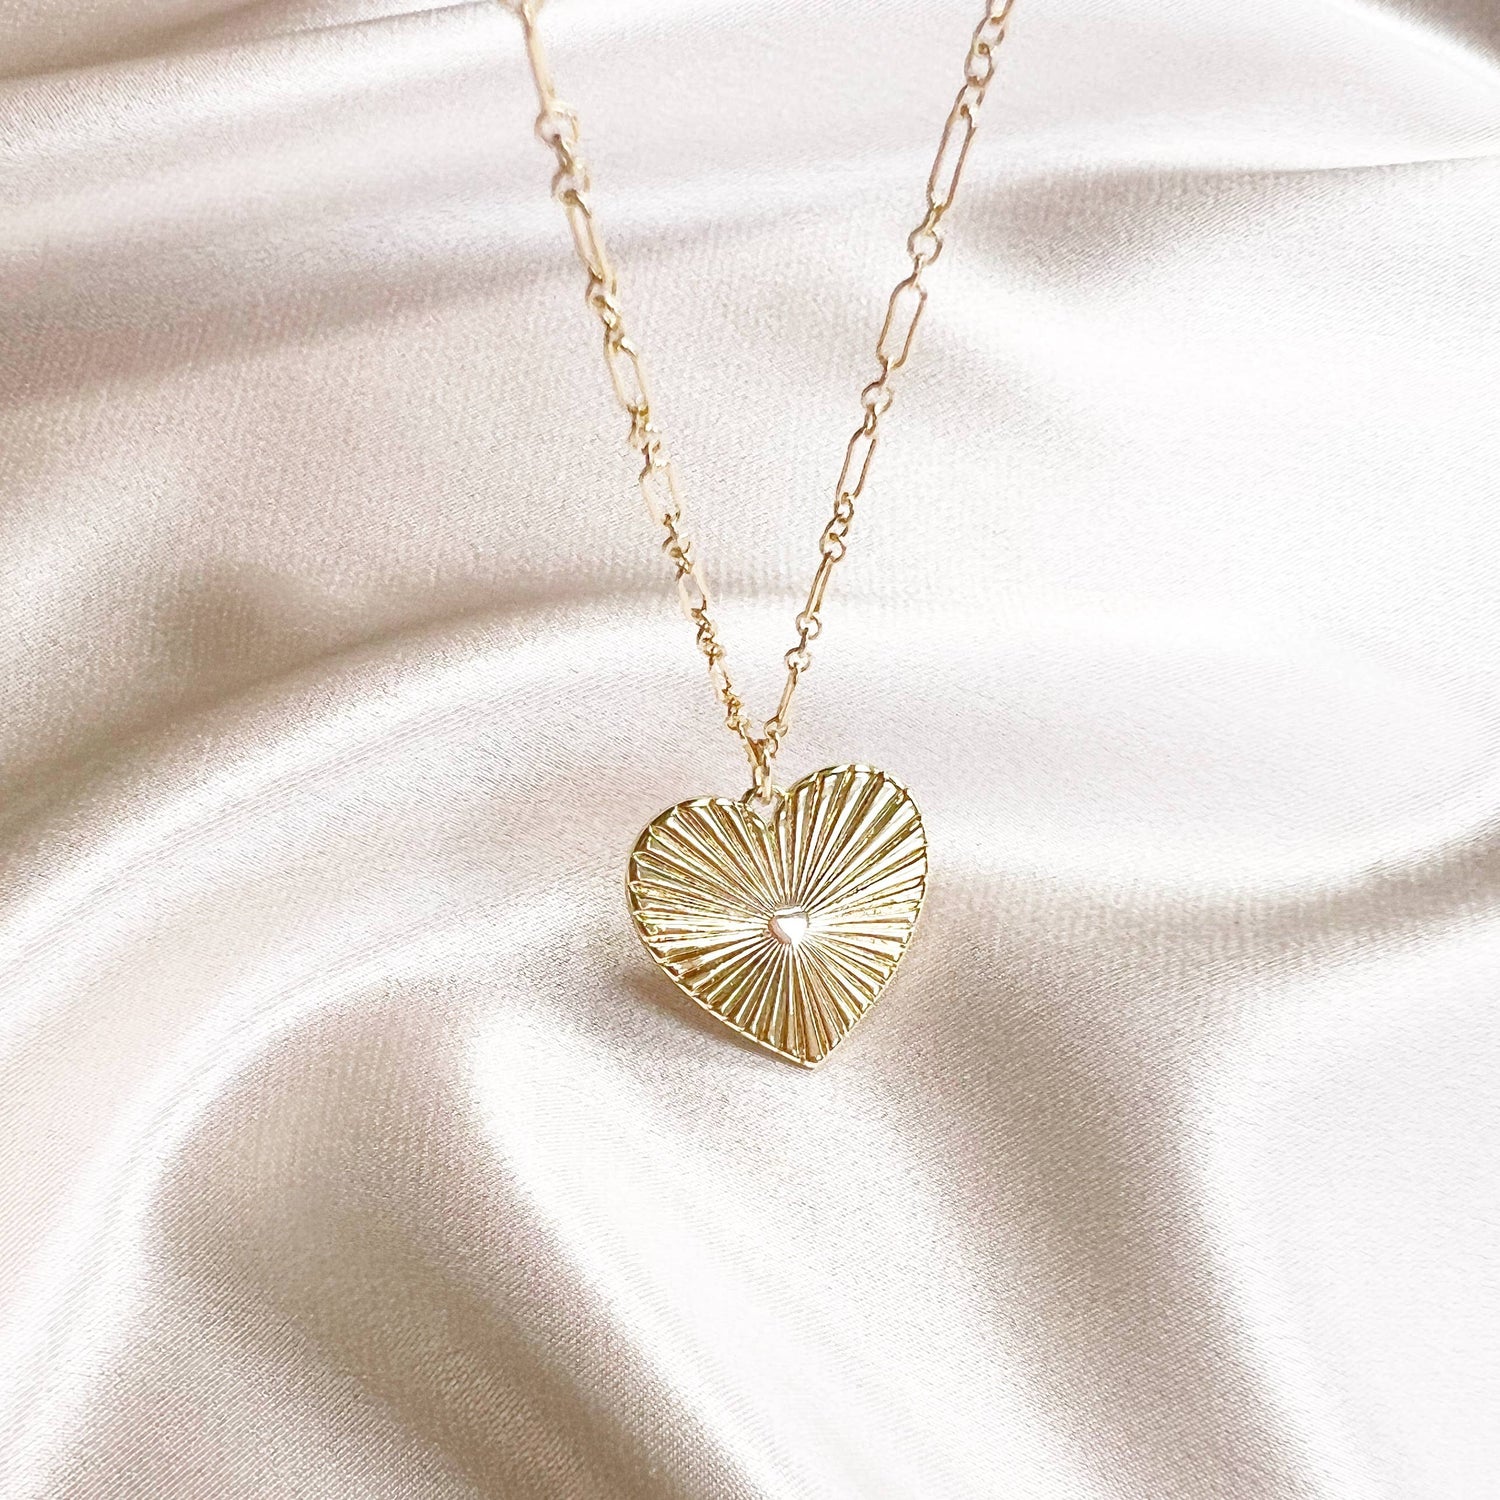 Soulmate Heart Necklace